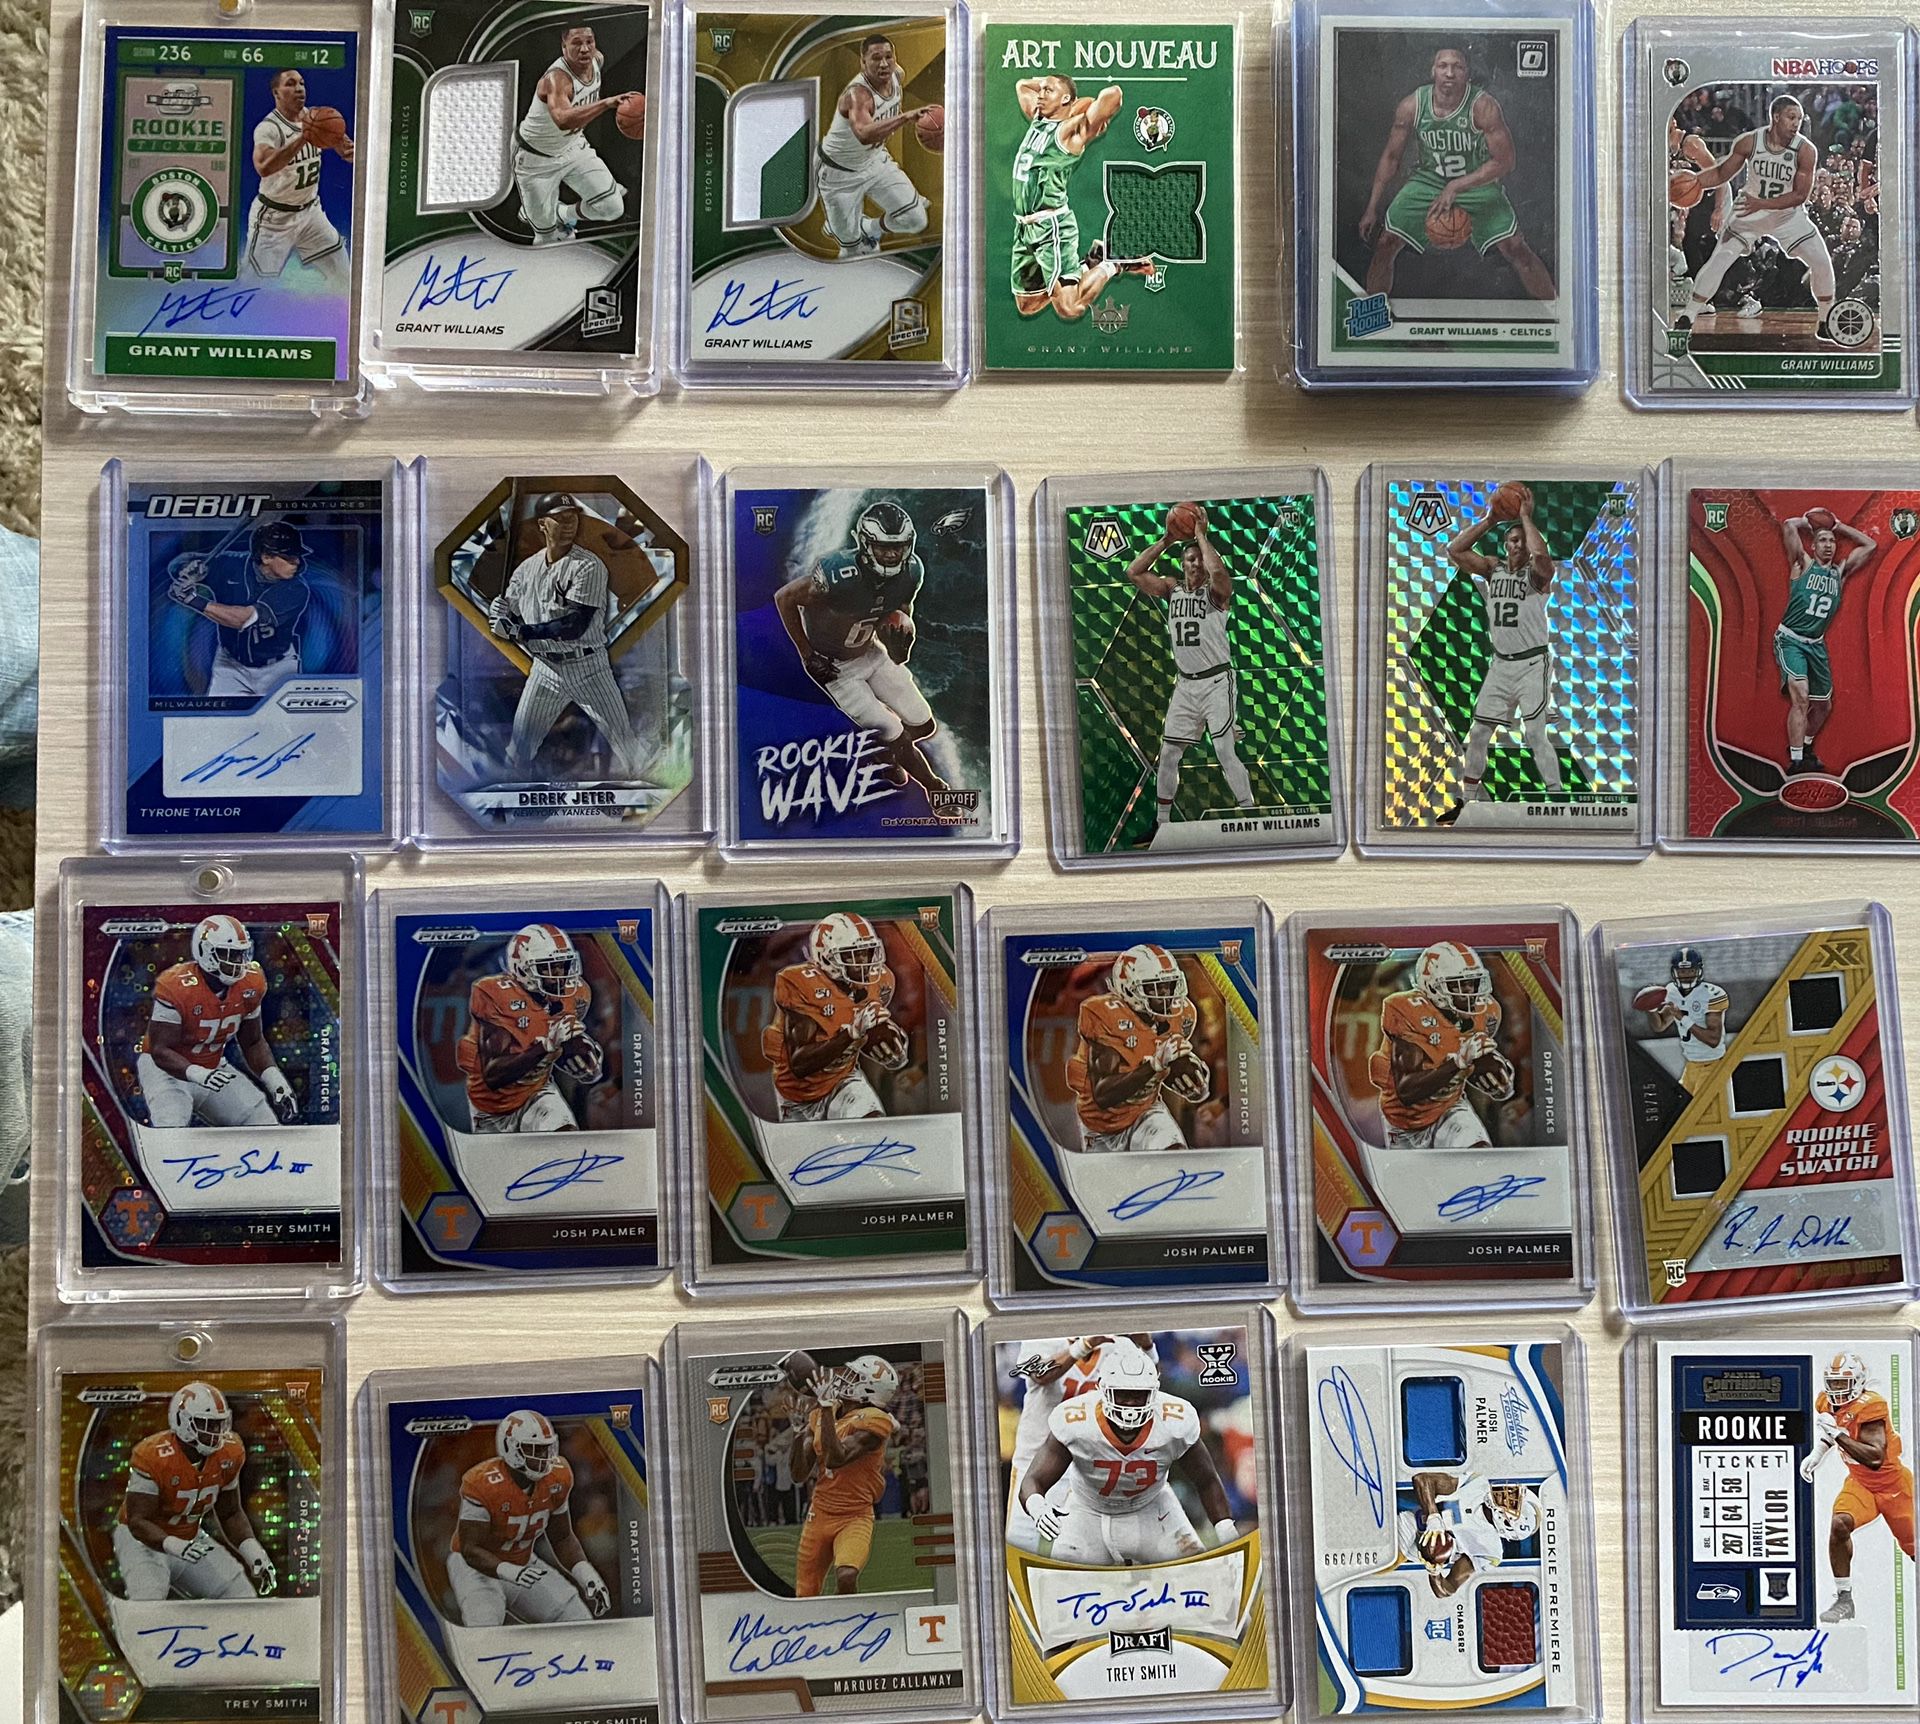 Tons Of Baseball Basketball Football Cards!! This Is A Steal!! Separated By Sport Now